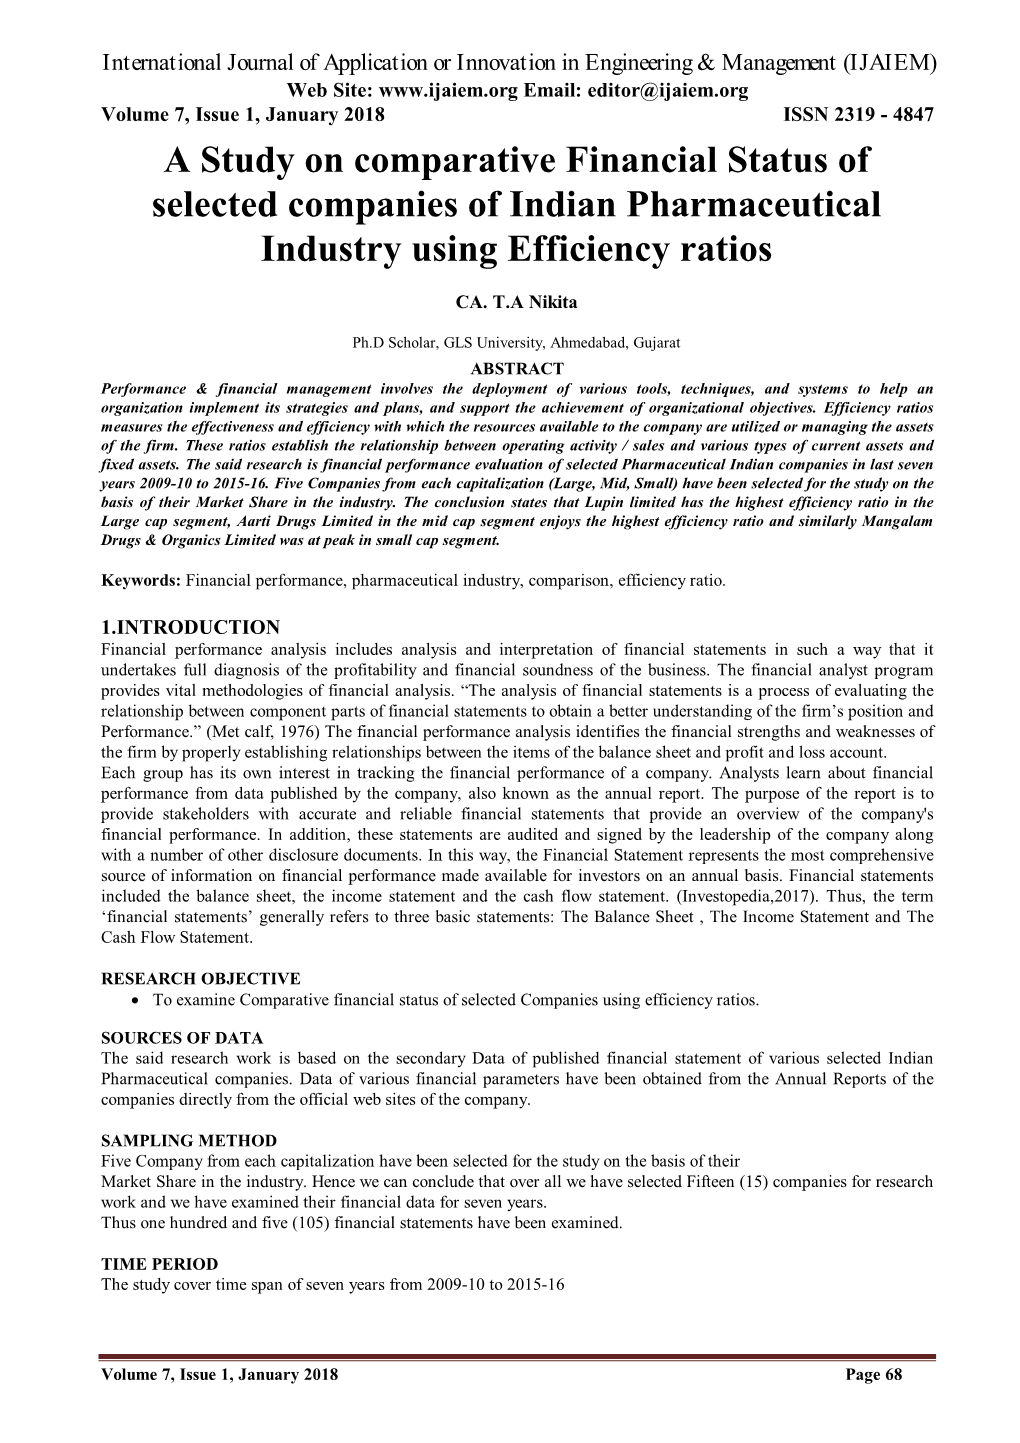 A Study on Comparative Financial Status of Selected Companies of Indian Pharmaceutical Industry Using Efficiency Ratios